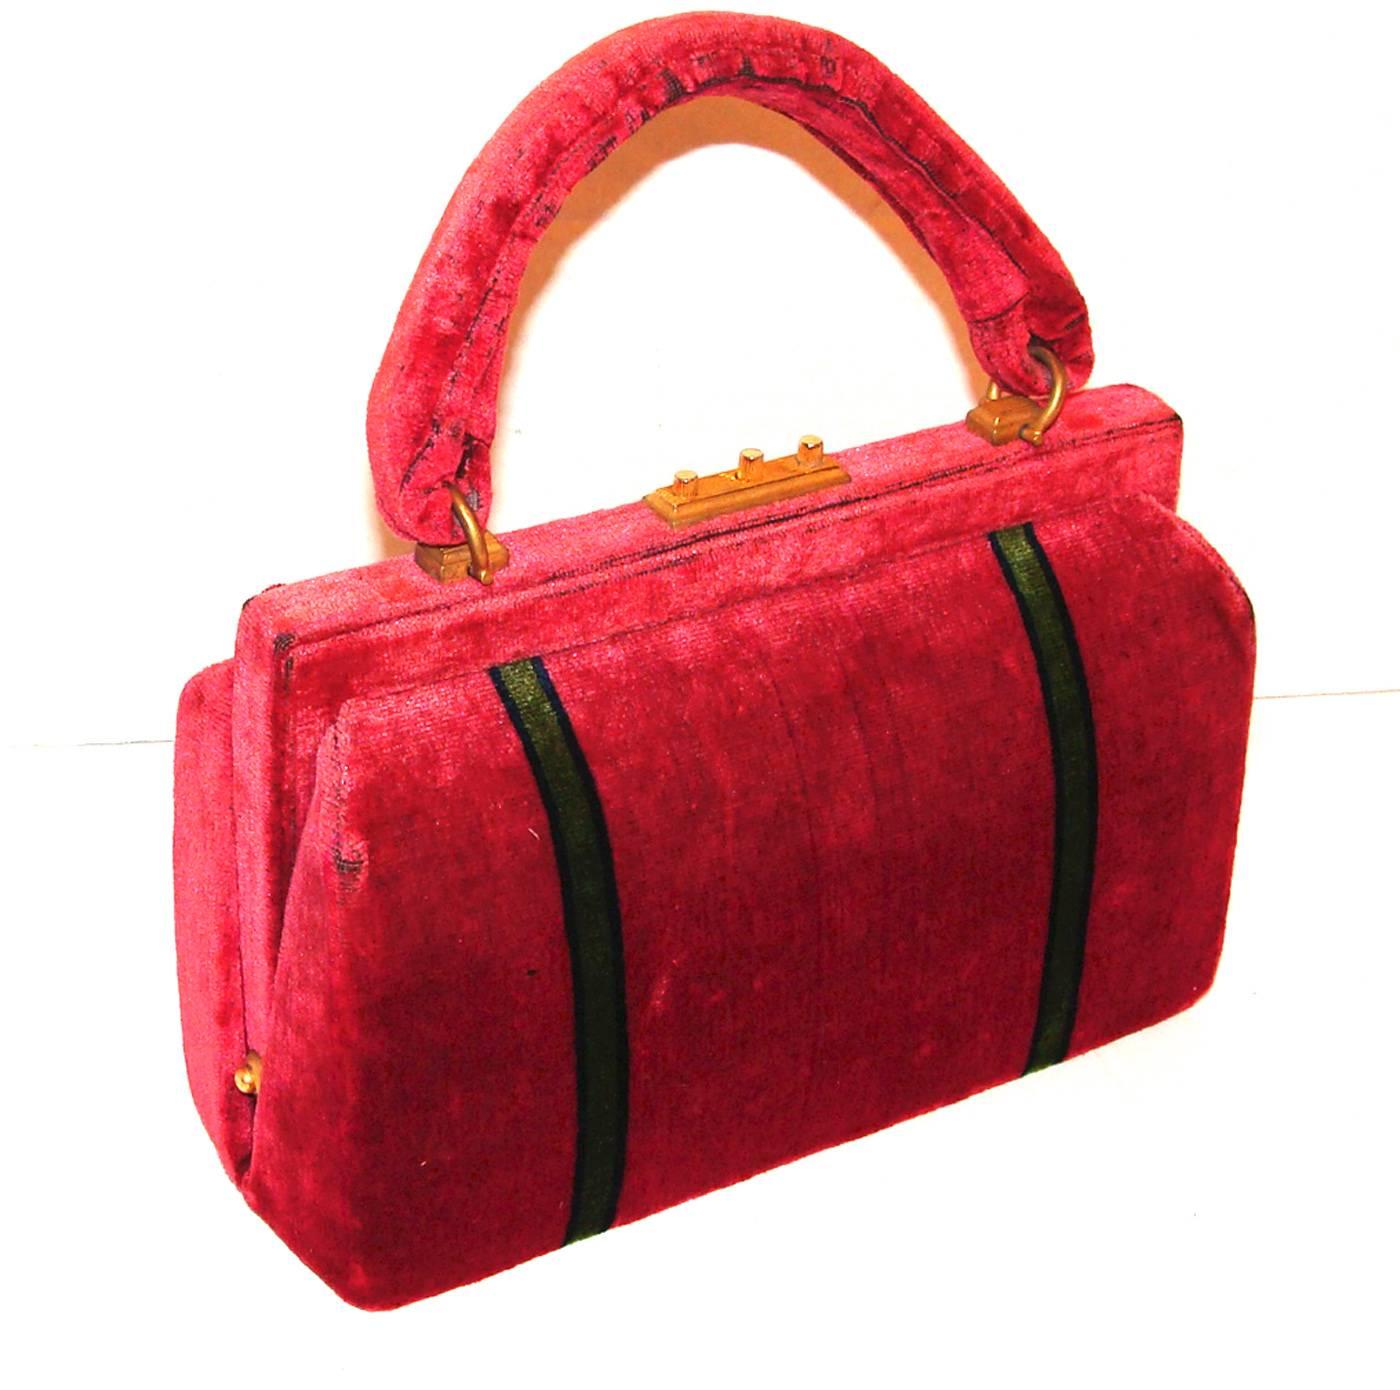 This gently aged raspberry red sculpted velvet bag is a classic from Roberta di Camerino.  Everything about it represents the best from RdC, from the patterned velvet, the florentine hardware, to the thick, sturdy handle.  This bag is from the same